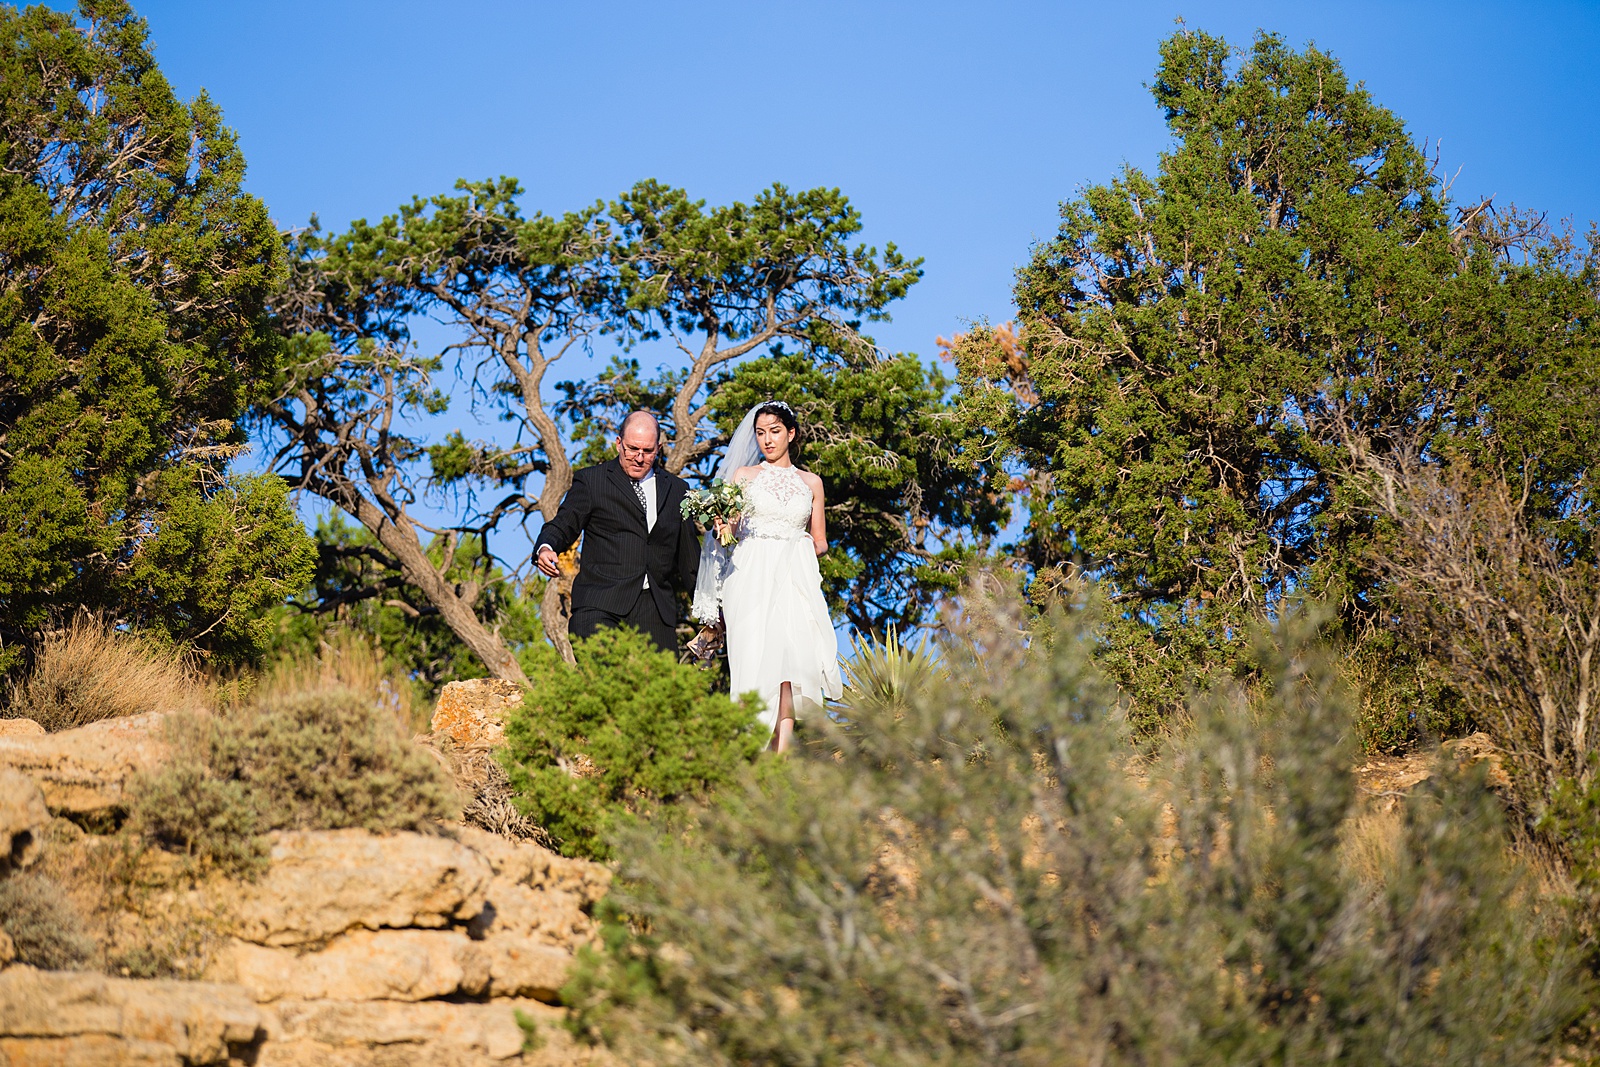 Bride walking down aisle during Moran Point wedding ceremony by Arizona elopement photographer PMA Photography.